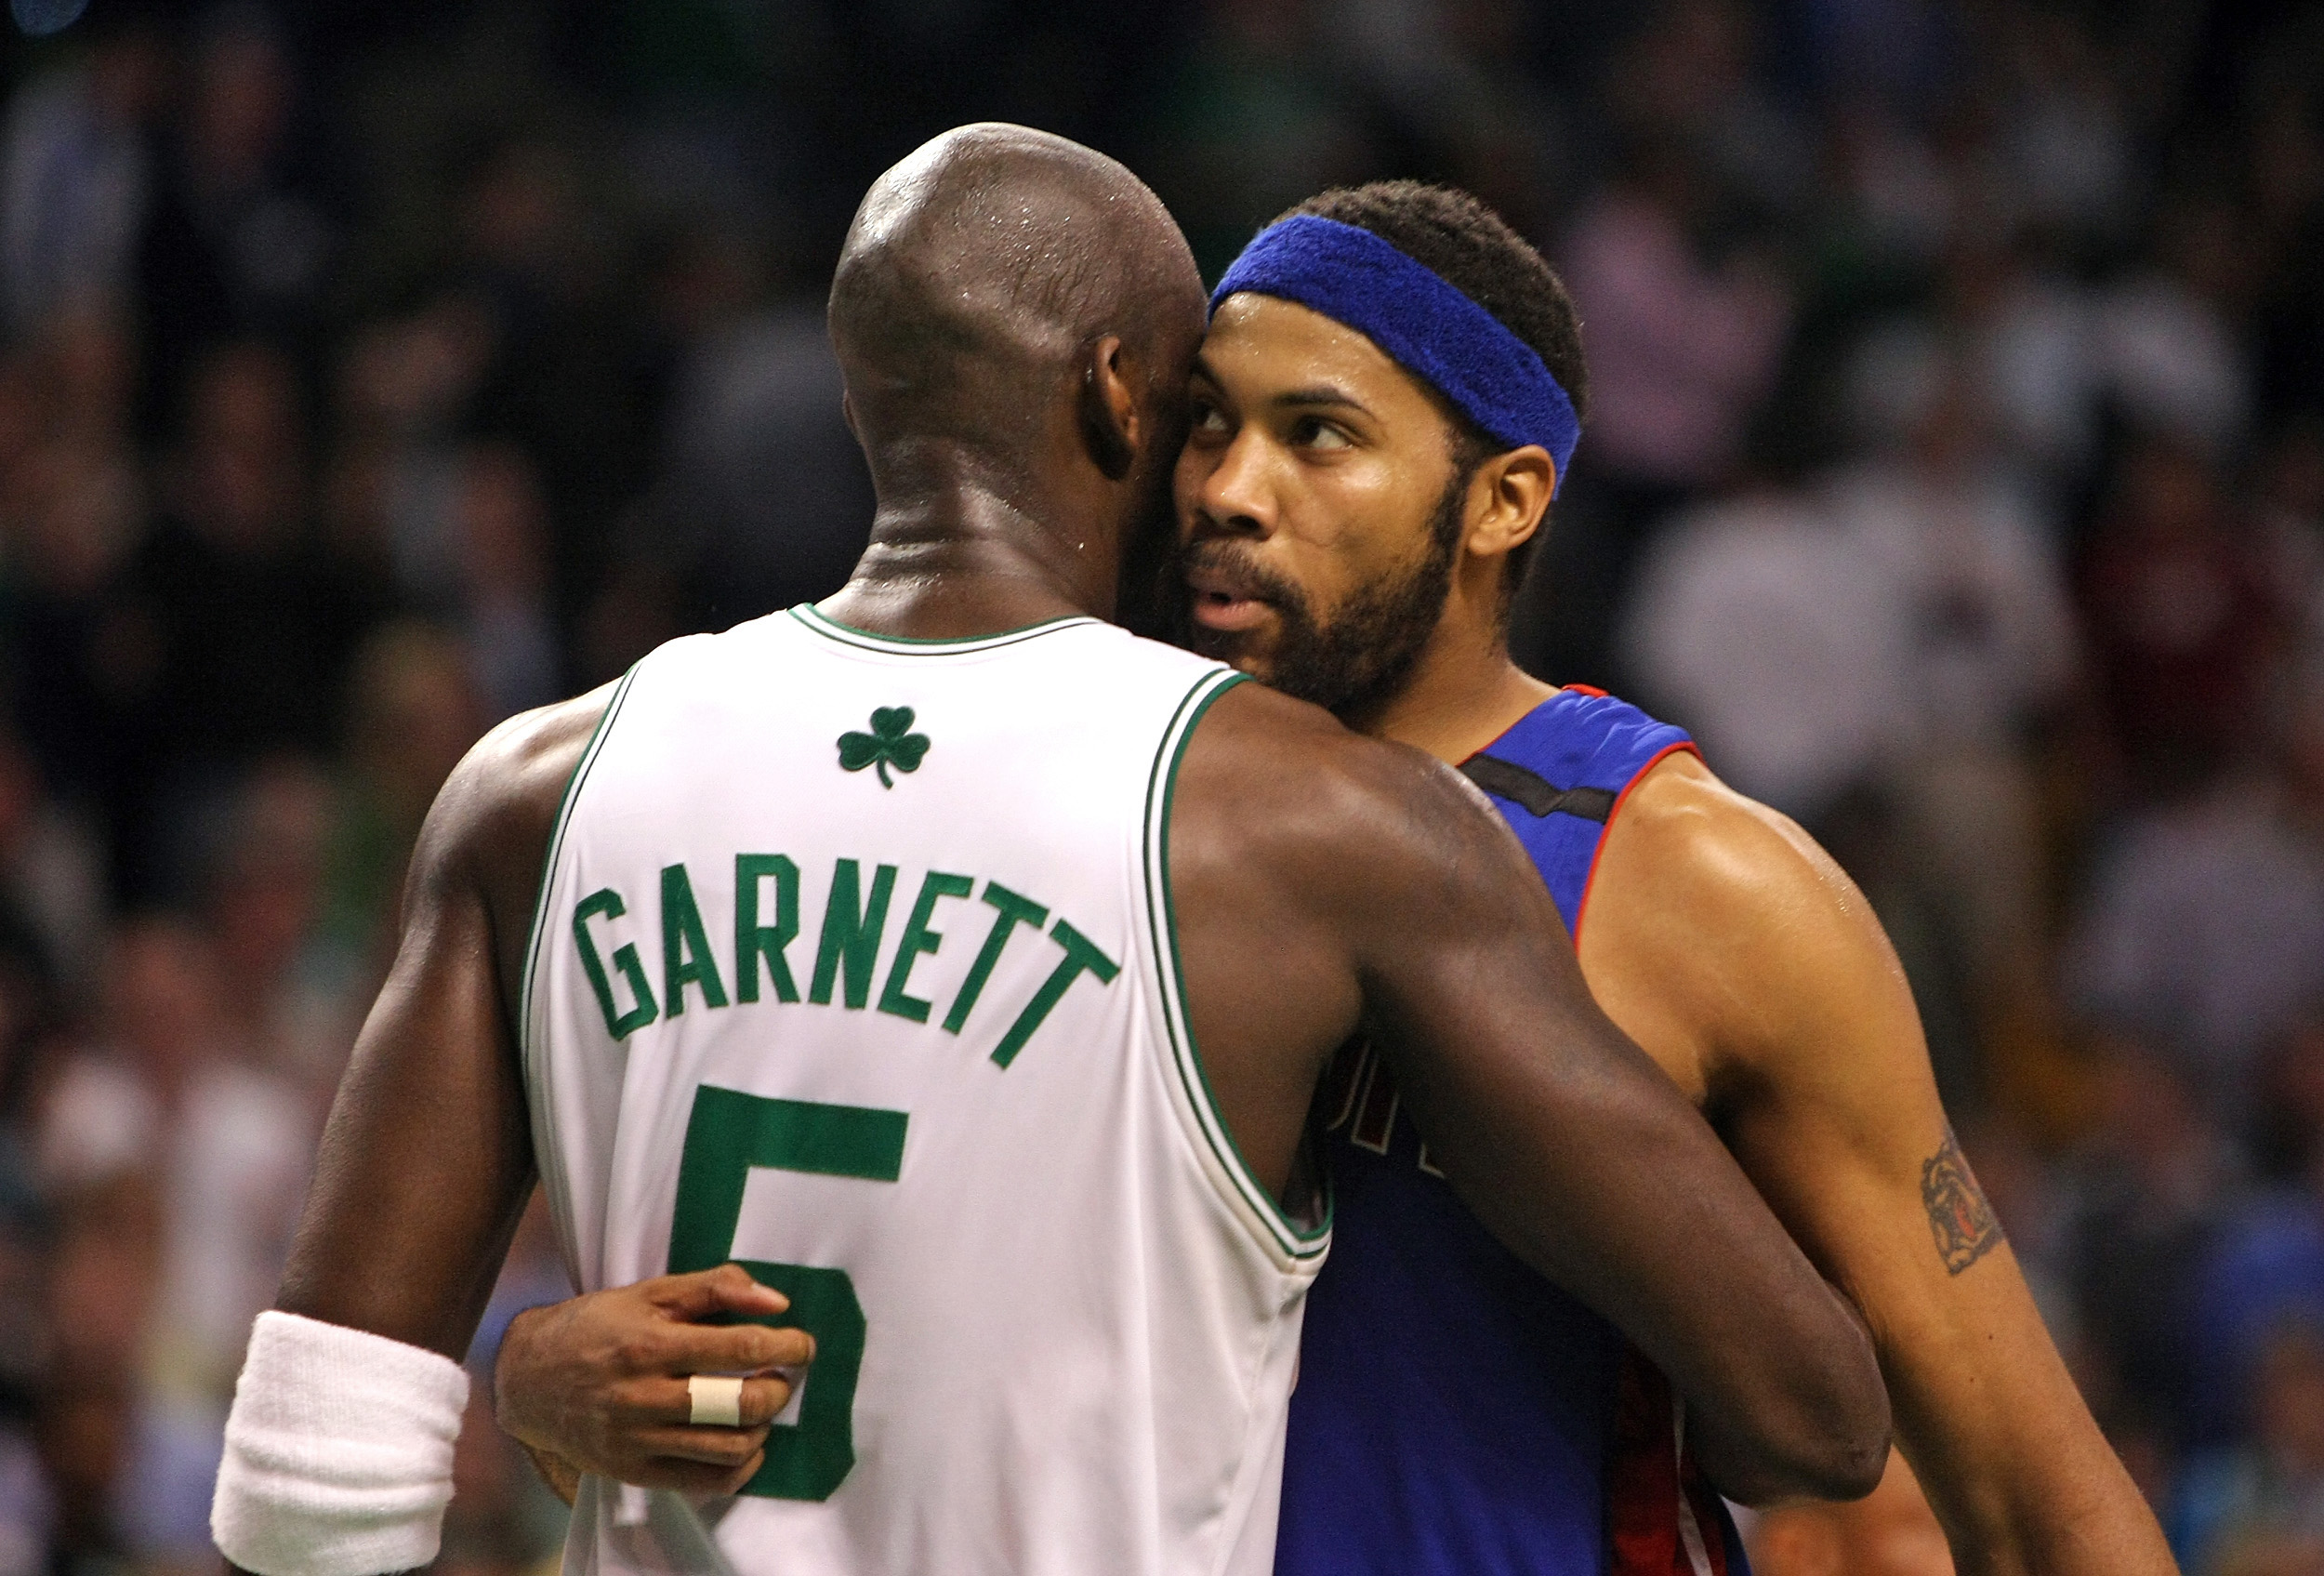 Kevin Garnett and Rasheed Wallace embrace following Game 1 of the 2008 Eastern Conference Finals